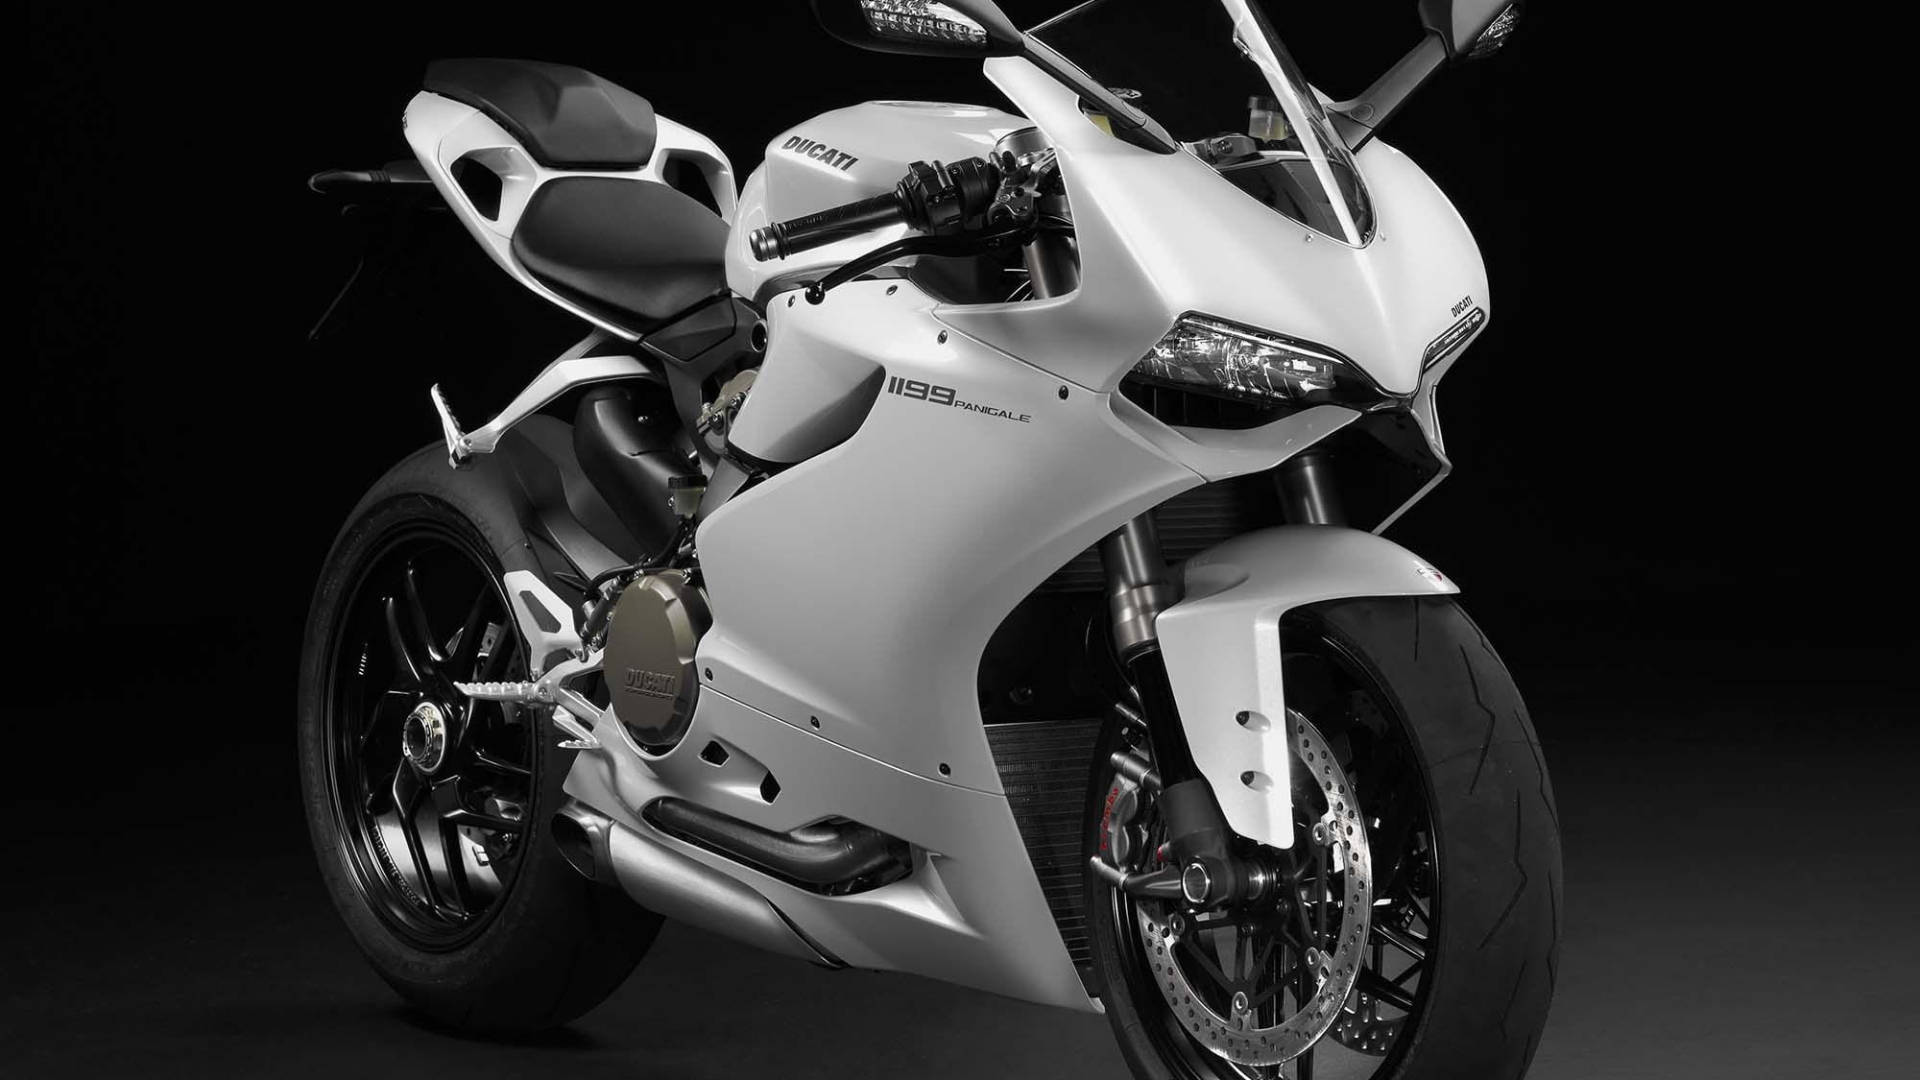 Enjoy the Speed and Style of the Ducati 1199 Panigale in Arctic White Wallpaper